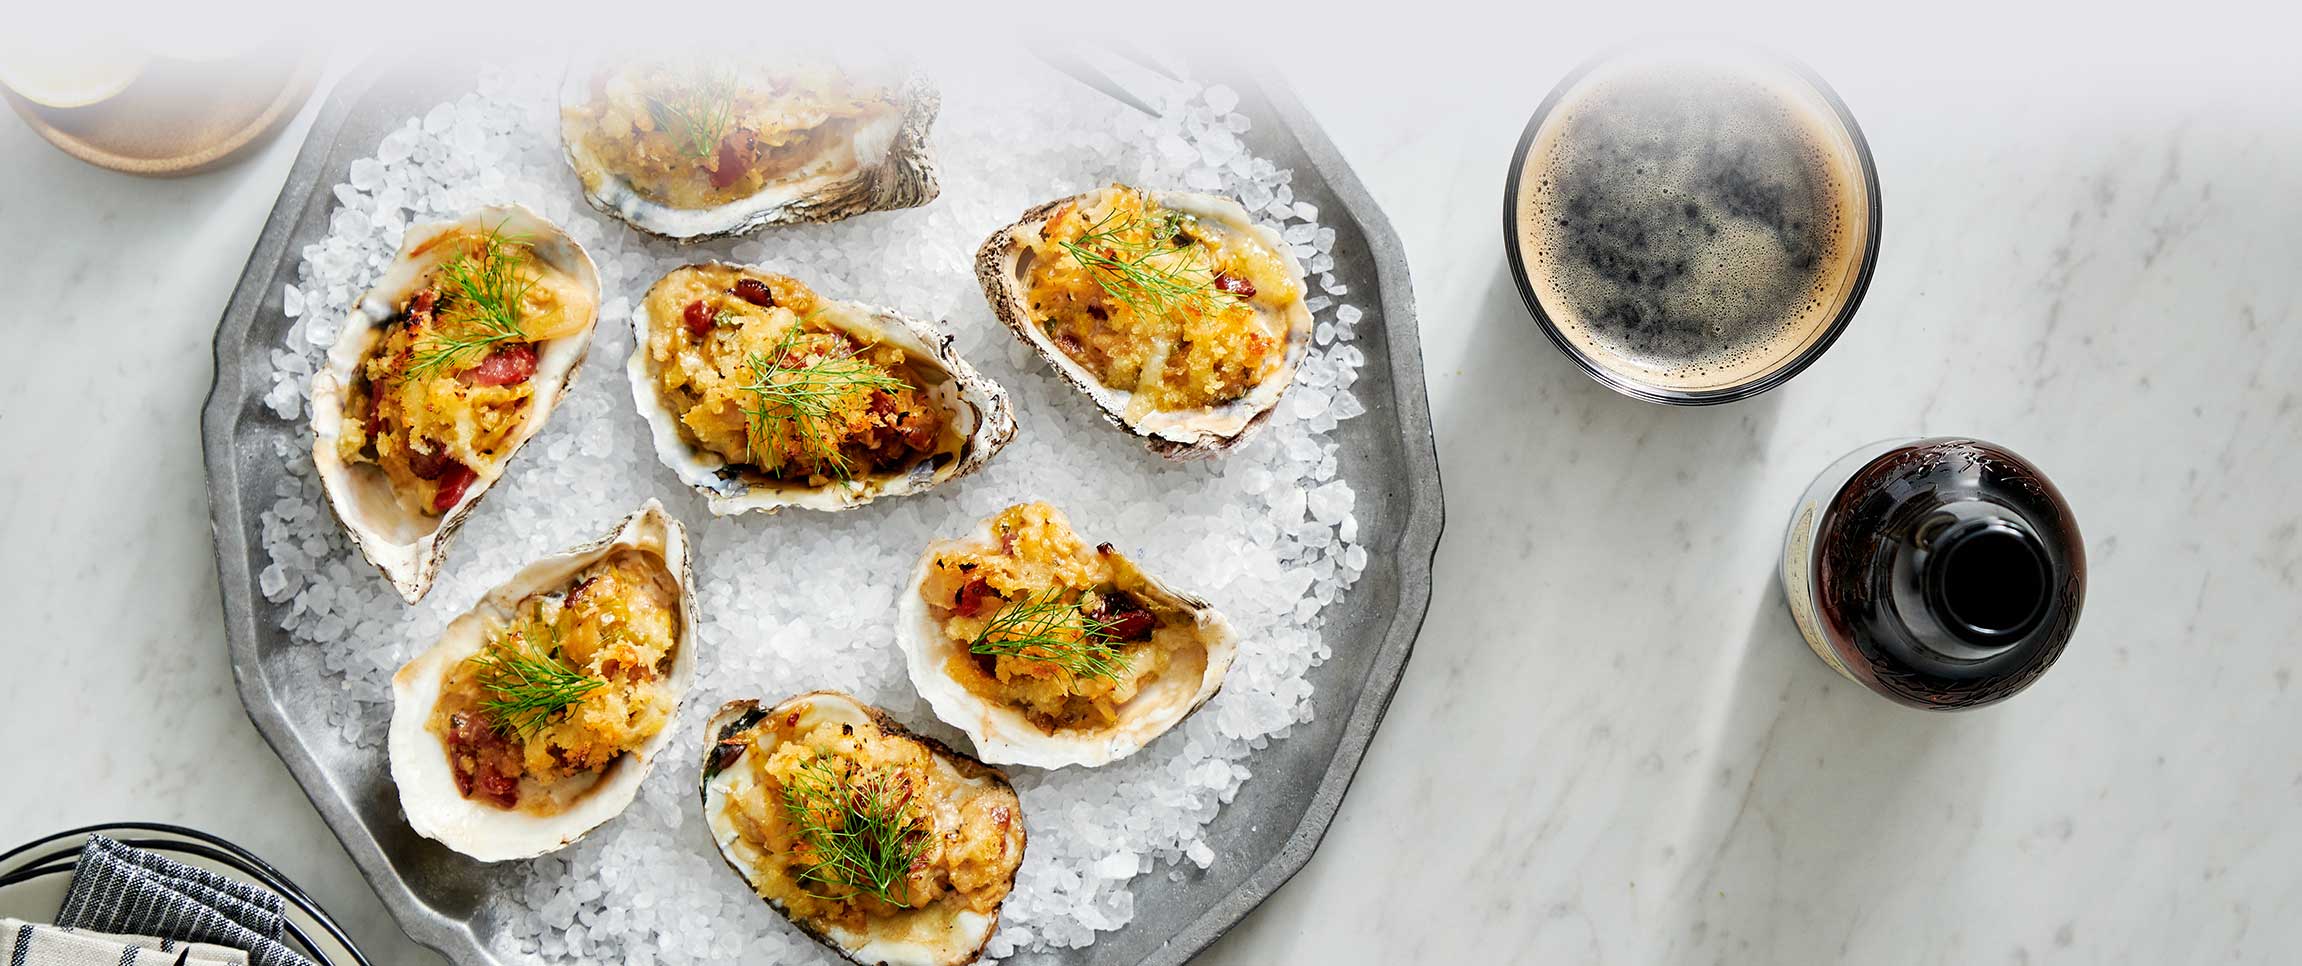 Cabbage and Bacon Baked Oysters